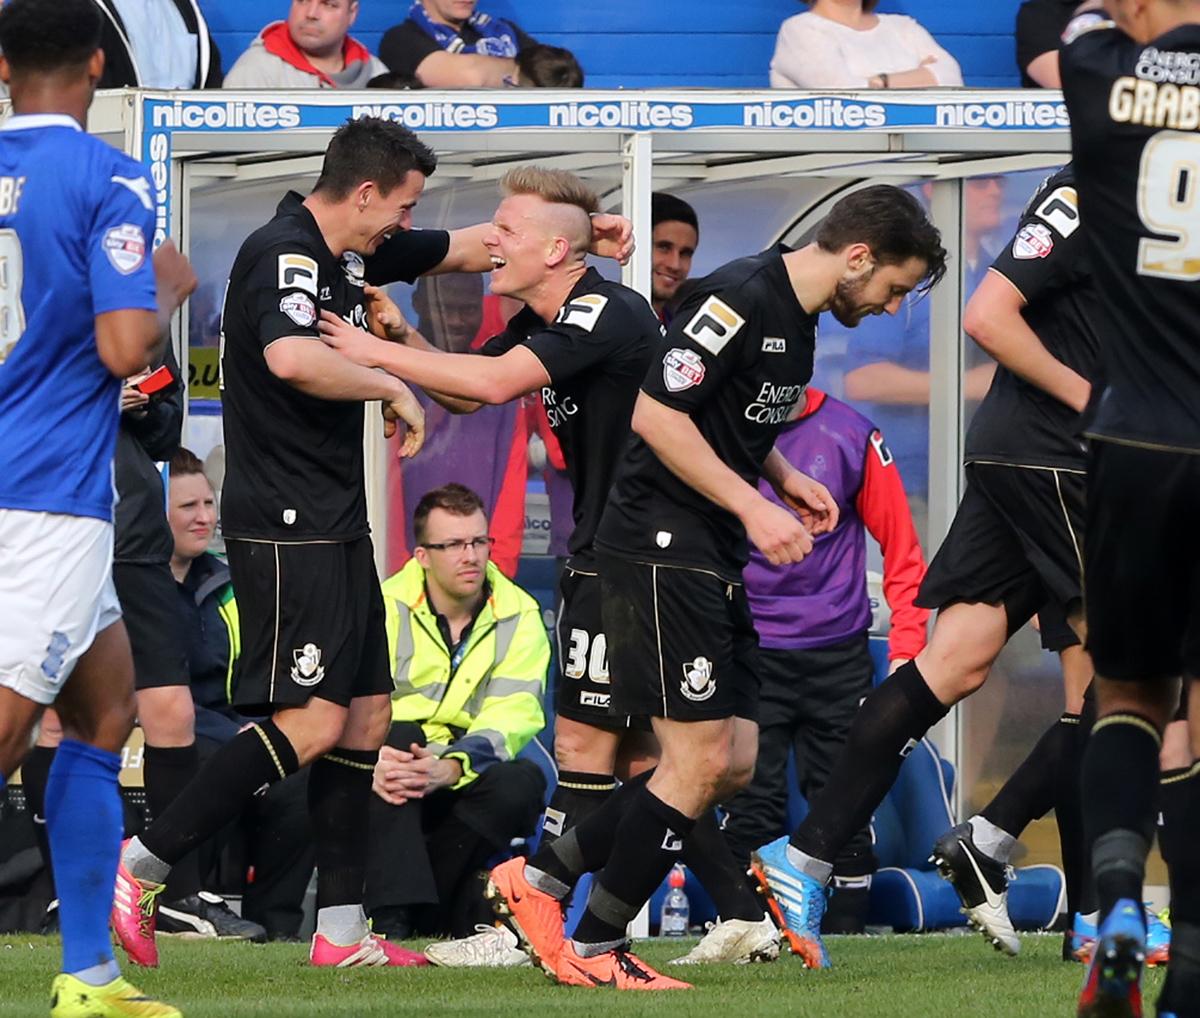 All the action and crowd shots from Birmingham v AFC Bournemouth at St Andrew's on Saturday March 29, 2014